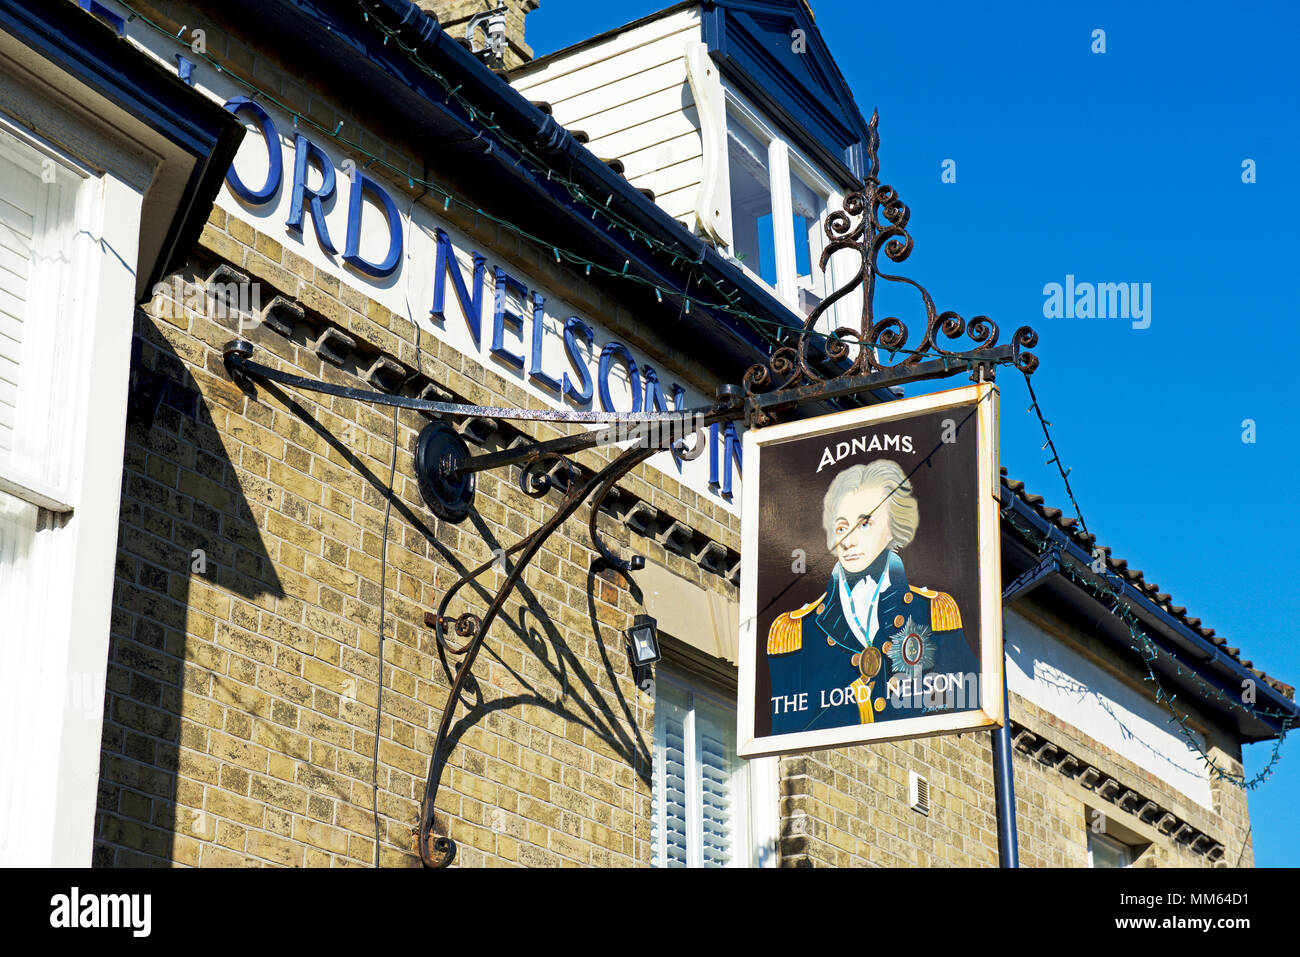 Pub sign - Lord Nelson - in Southwold, Suffolk, England UK Stock Photo